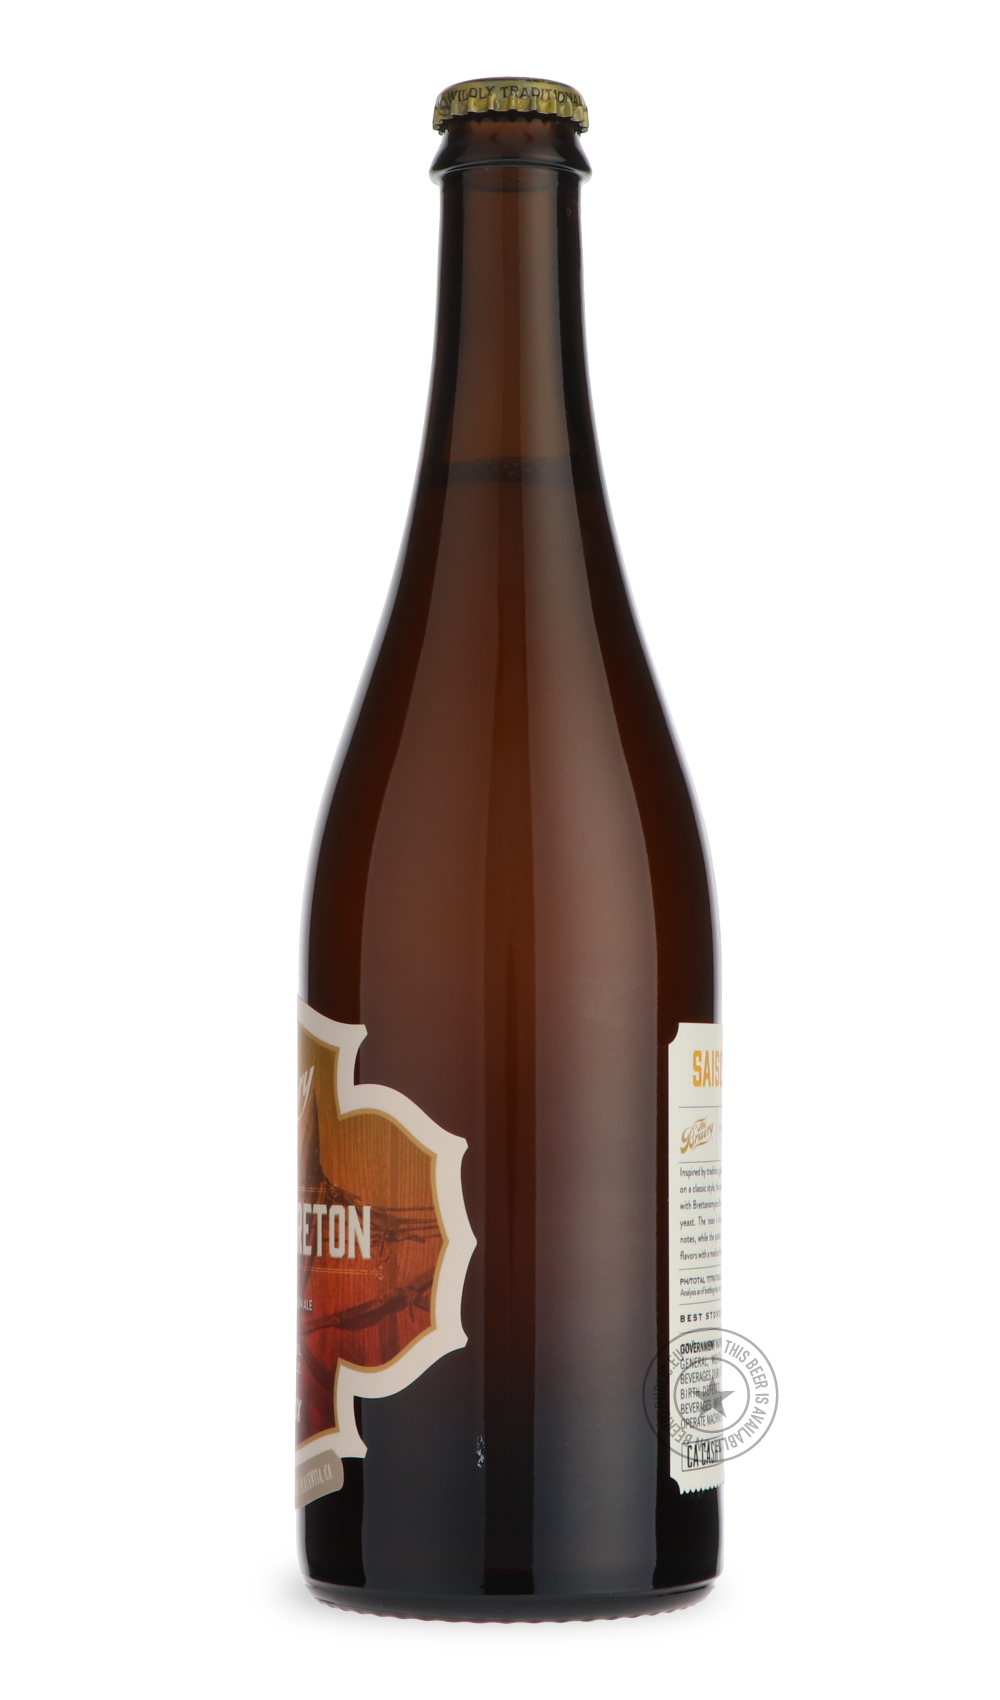 -The Bruery- Terreux Saison Breton-Sour / Wild & Fruity- Only @ Beer Republic - The best online beer store for American & Canadian craft beer - Buy beer online from the USA and Canada - Bier online kopen - Amerikaans bier kopen - Craft beer store - Craft beer kopen - Amerikanisch bier kaufen - Bier online kaufen - Acheter biere online - IPA - Stout - Porter - New England IPA - Hazy IPA - Imperial Stout - Barrel Aged - Barrel Aged Imperial Stout - Brown - Dark beer - Blond - Blonde - Pilsner - Lager - Wheat 